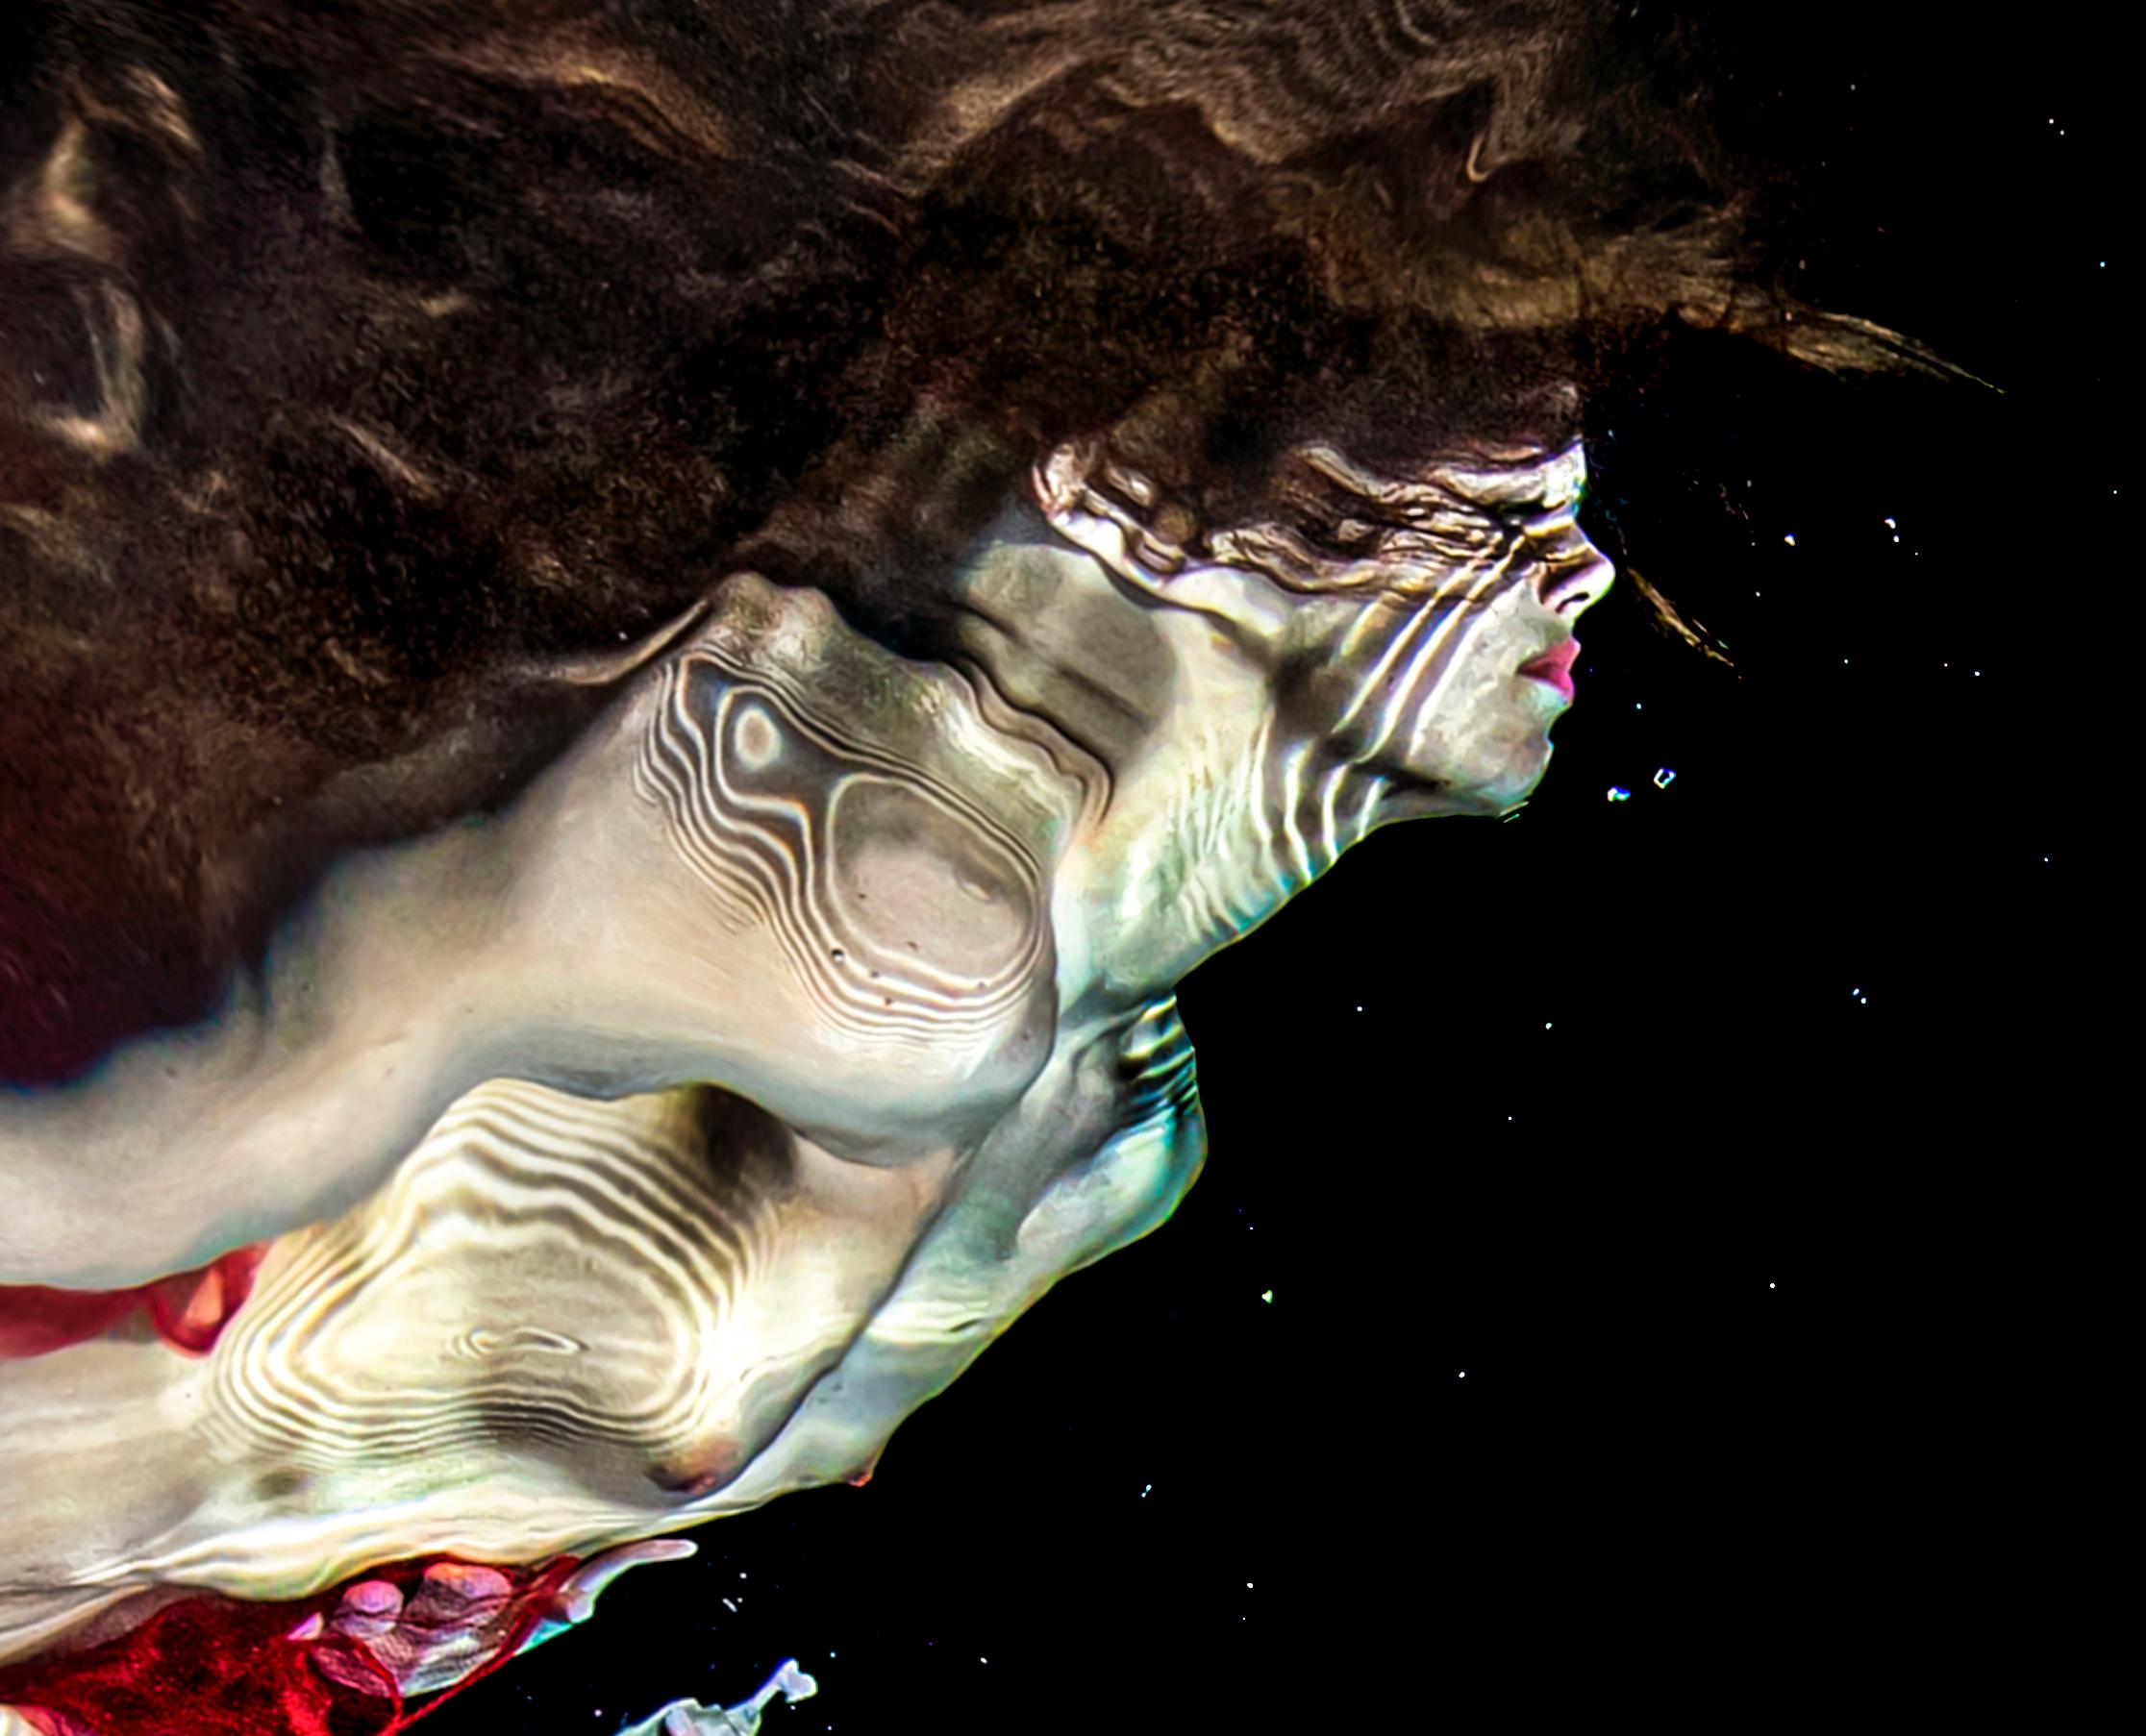 Salsa - underwater nude photograph series REFLECTIONS - archival pigment 23x35